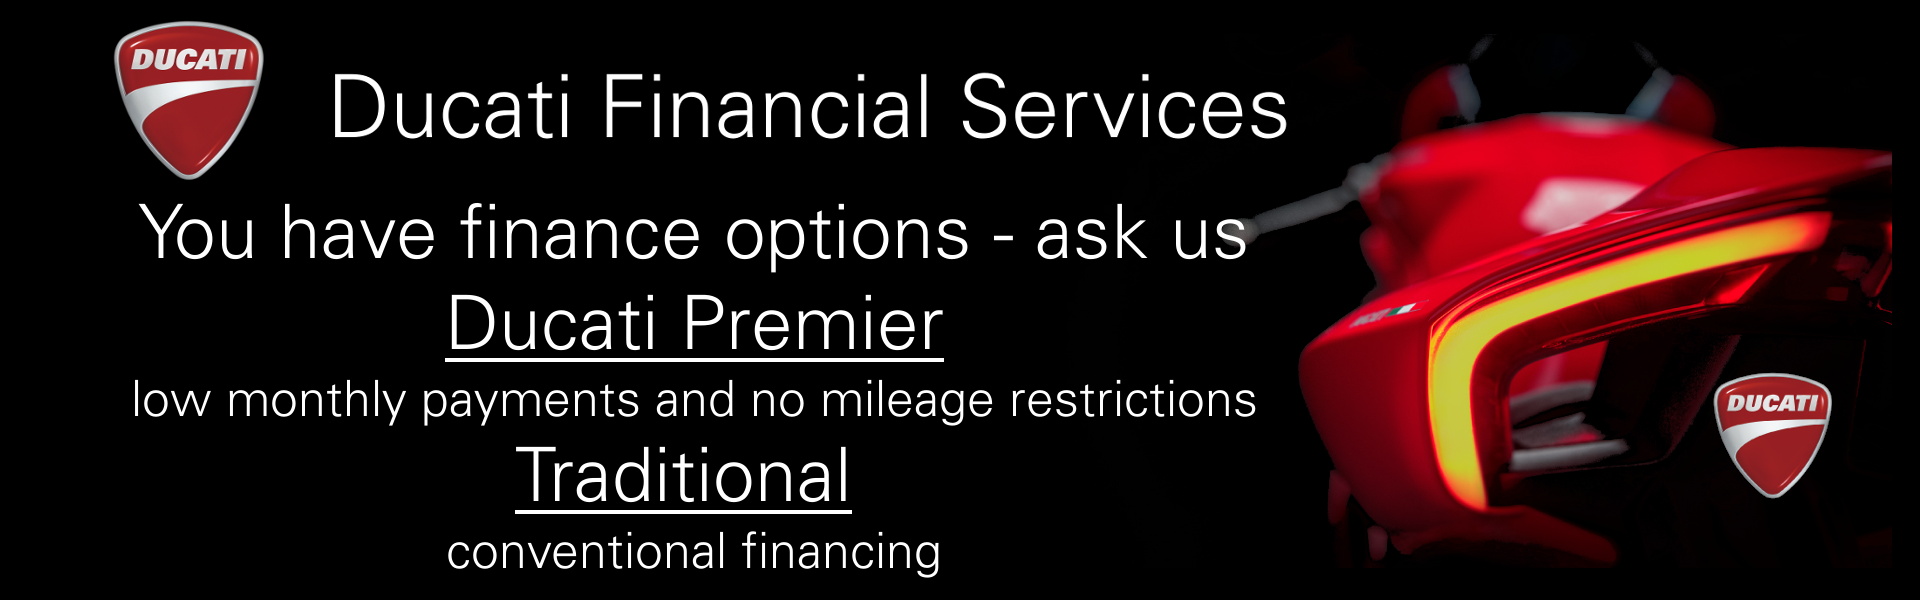 Ask Us About Ducati Premier versus Traditional Financing Options